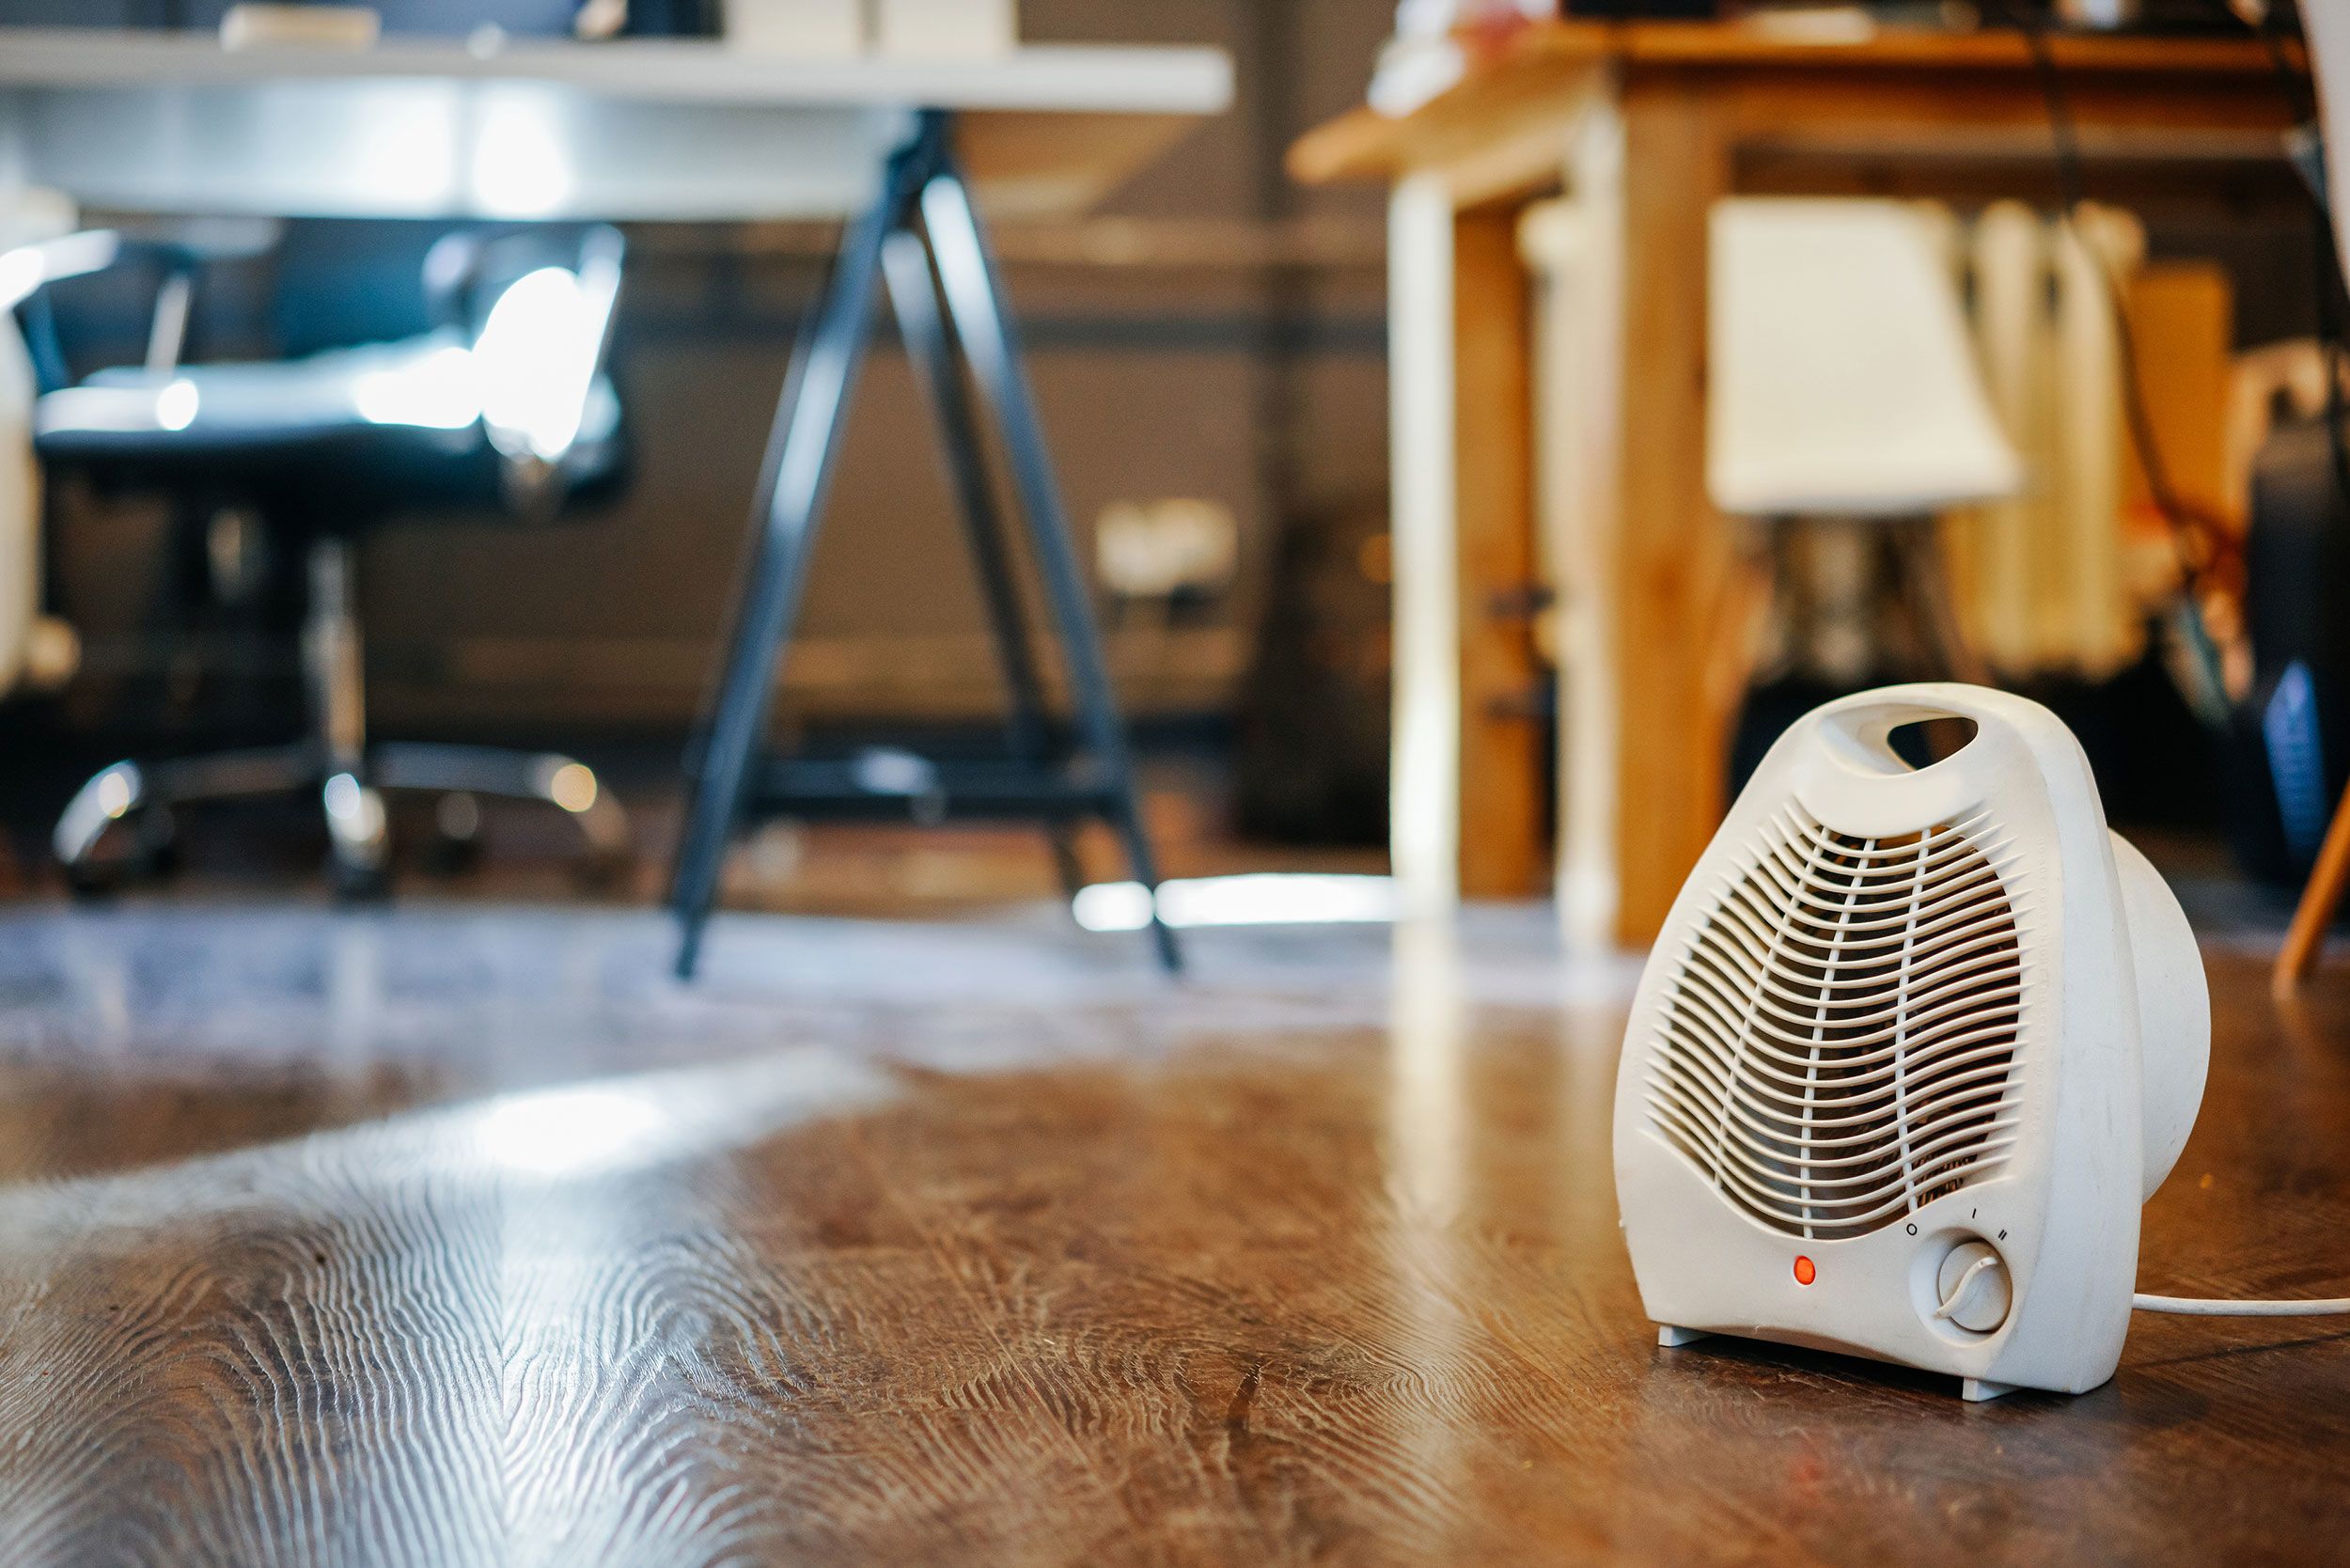 Space Heater Safety Guide: How to Run a Space Heater Without Risk of Fire -  CNET